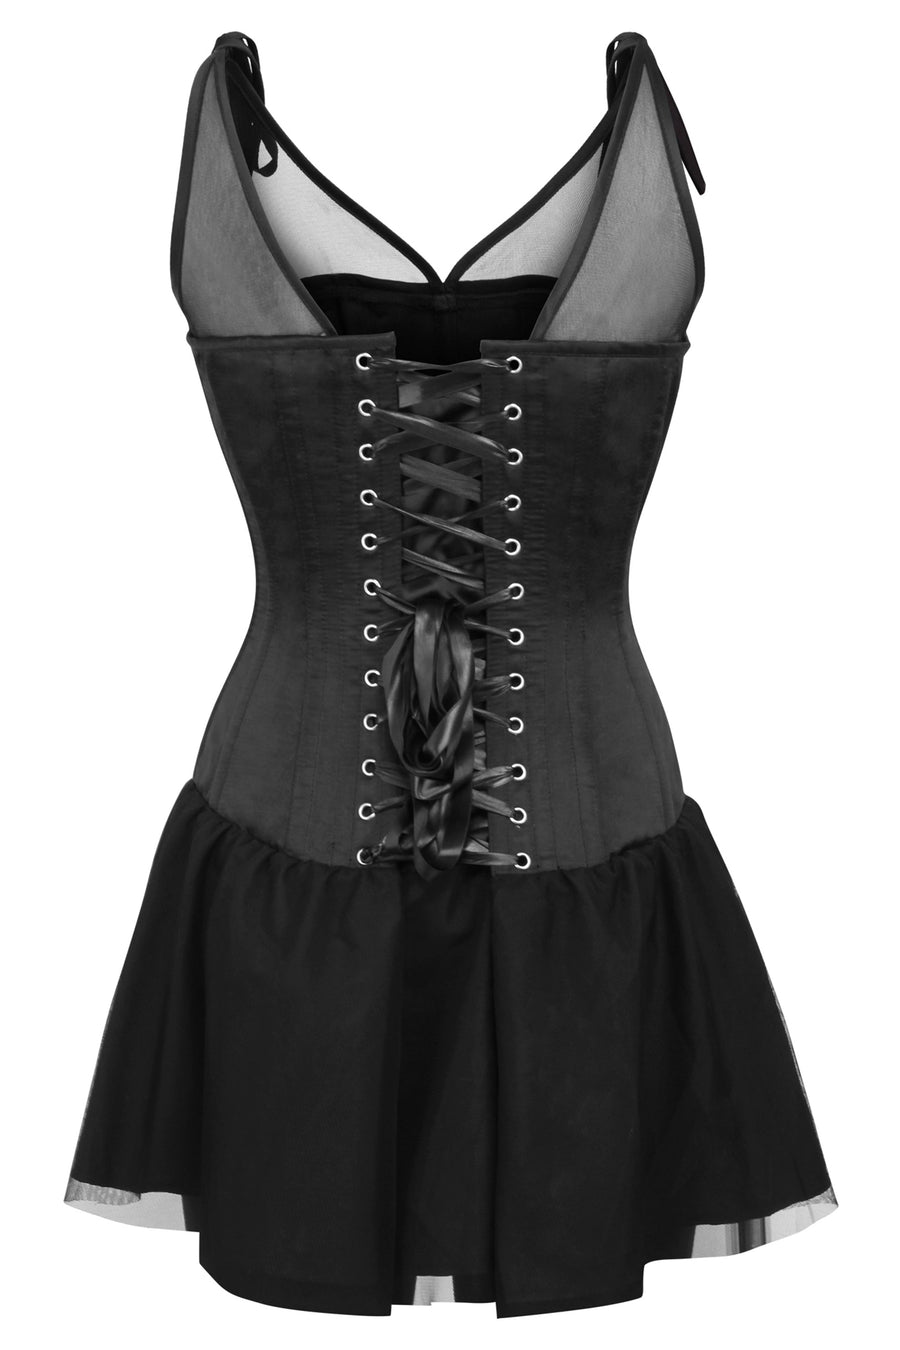 Elaborate Gothic Dress with Corset and Shorter-Front Skirt